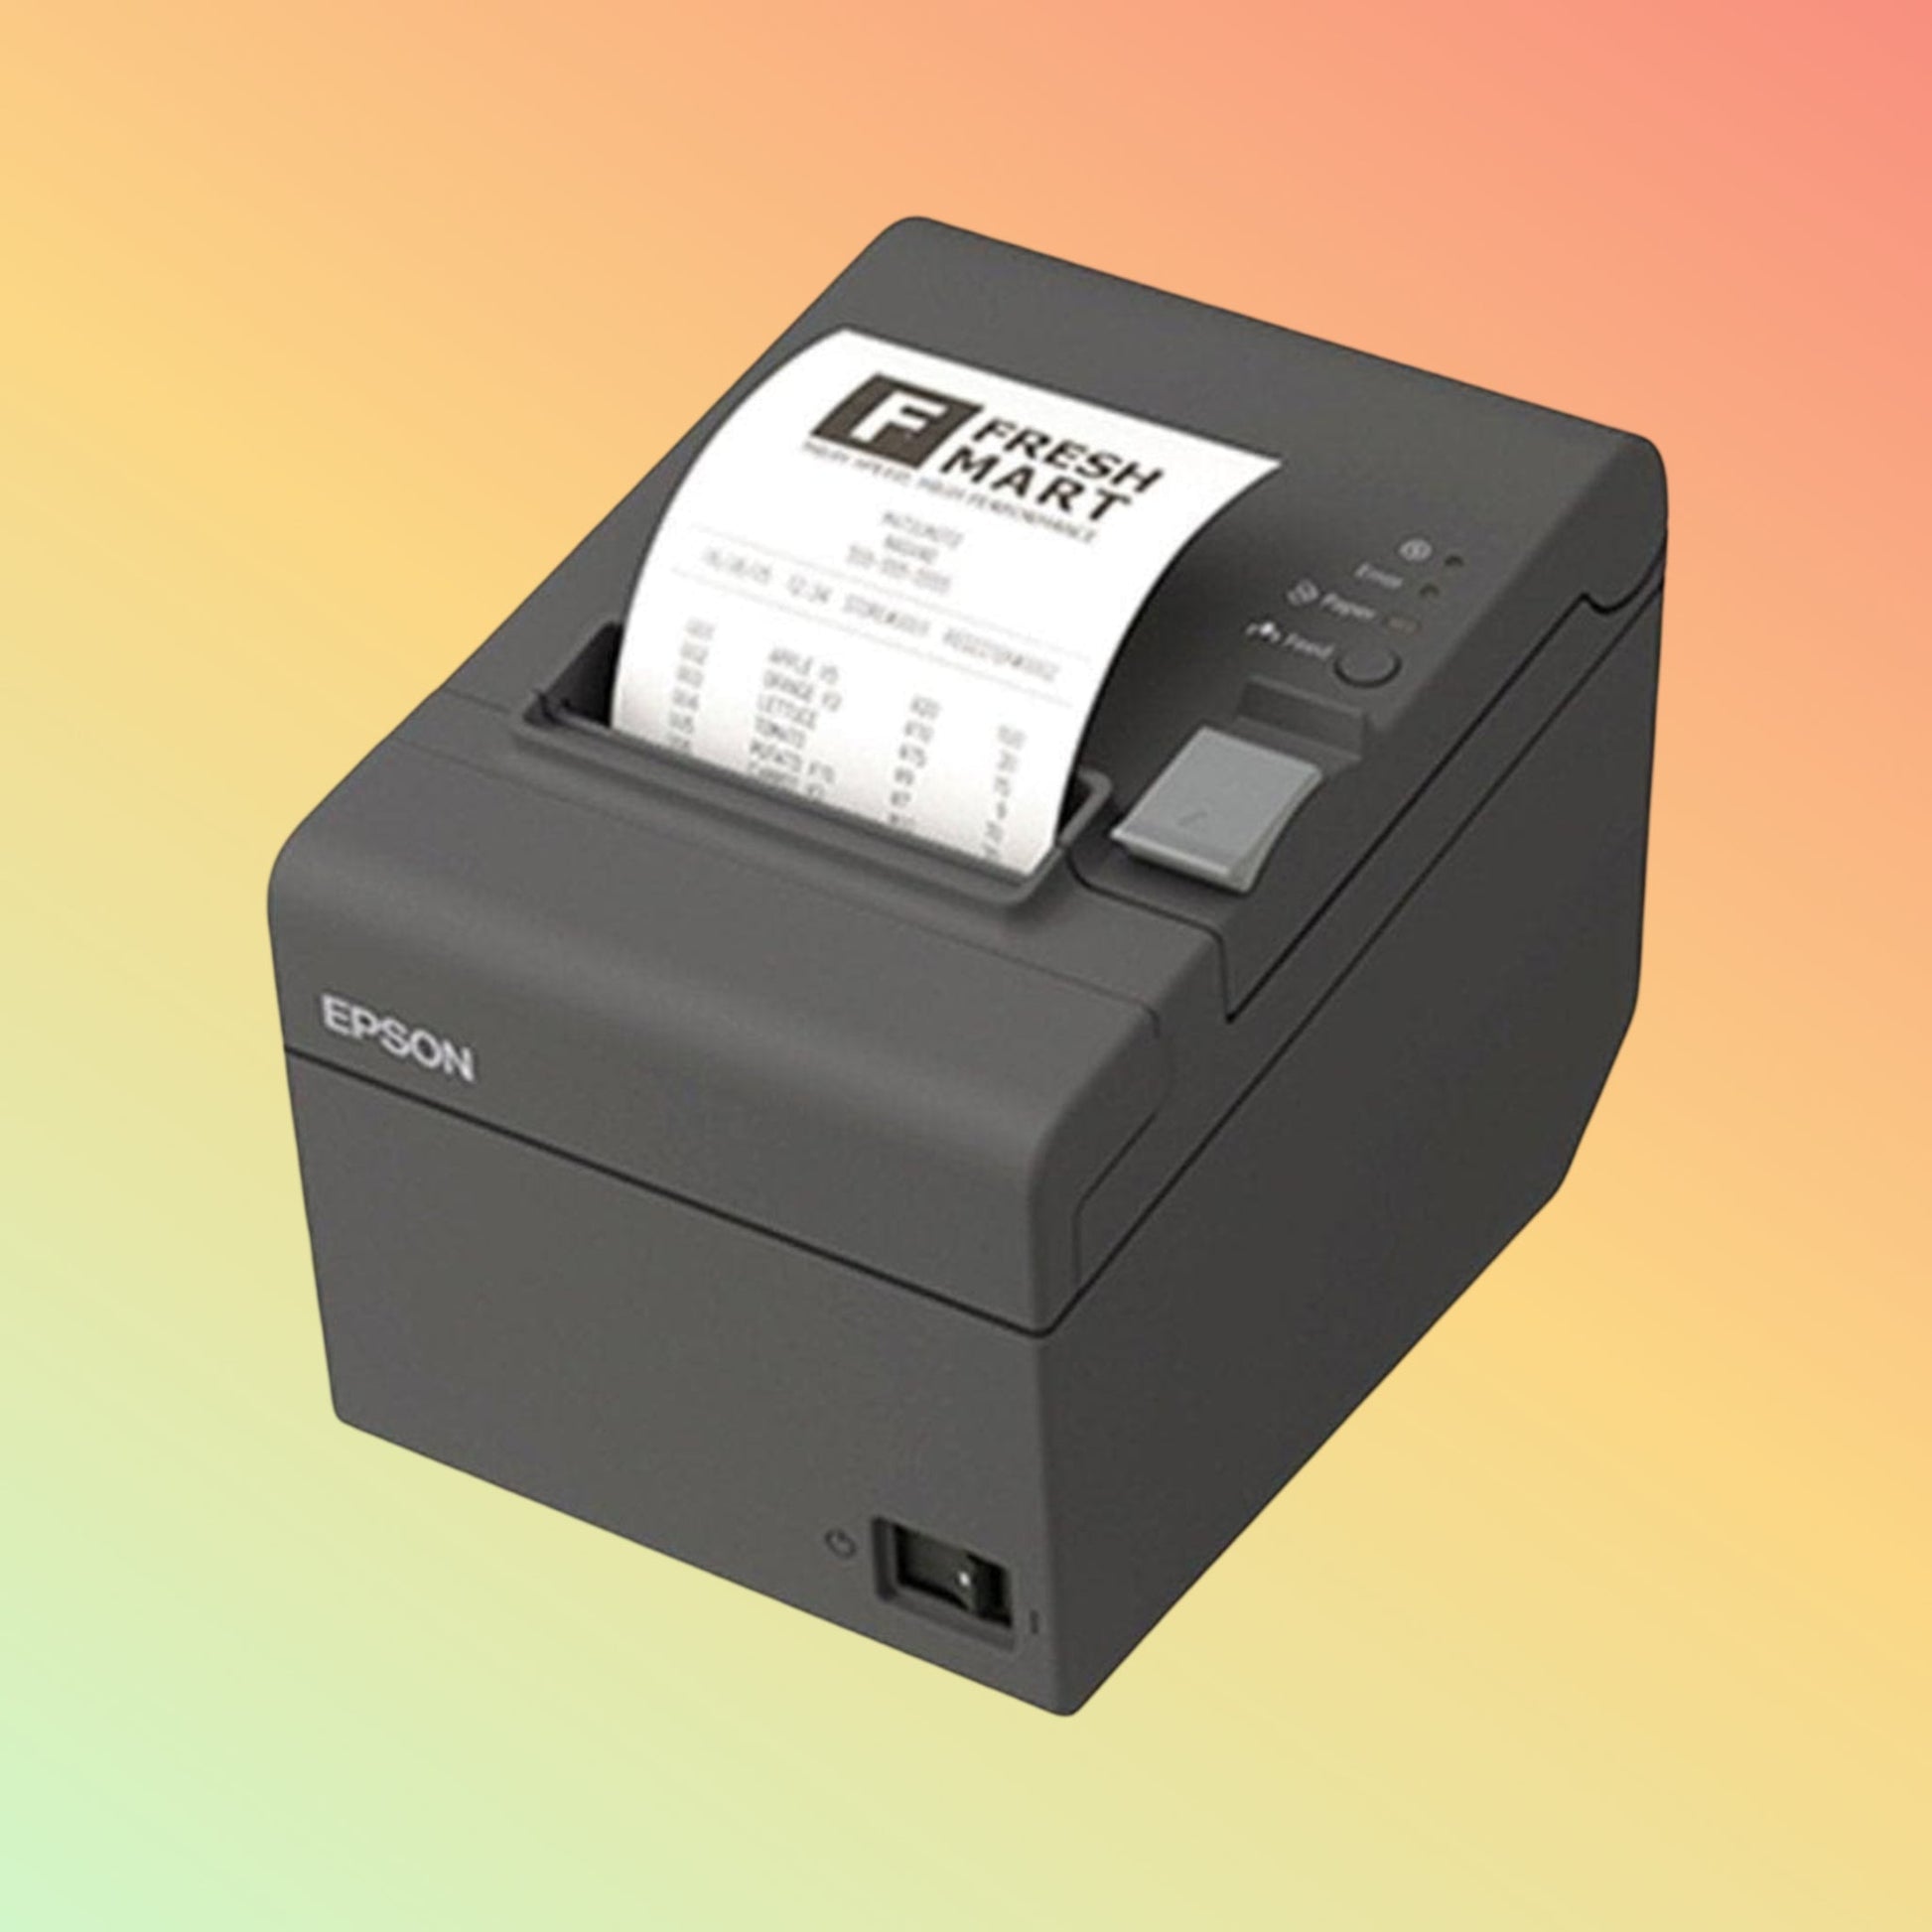 Alt="Epson T20III thermal printer with its durable build, ready for high-demand checkout environments."